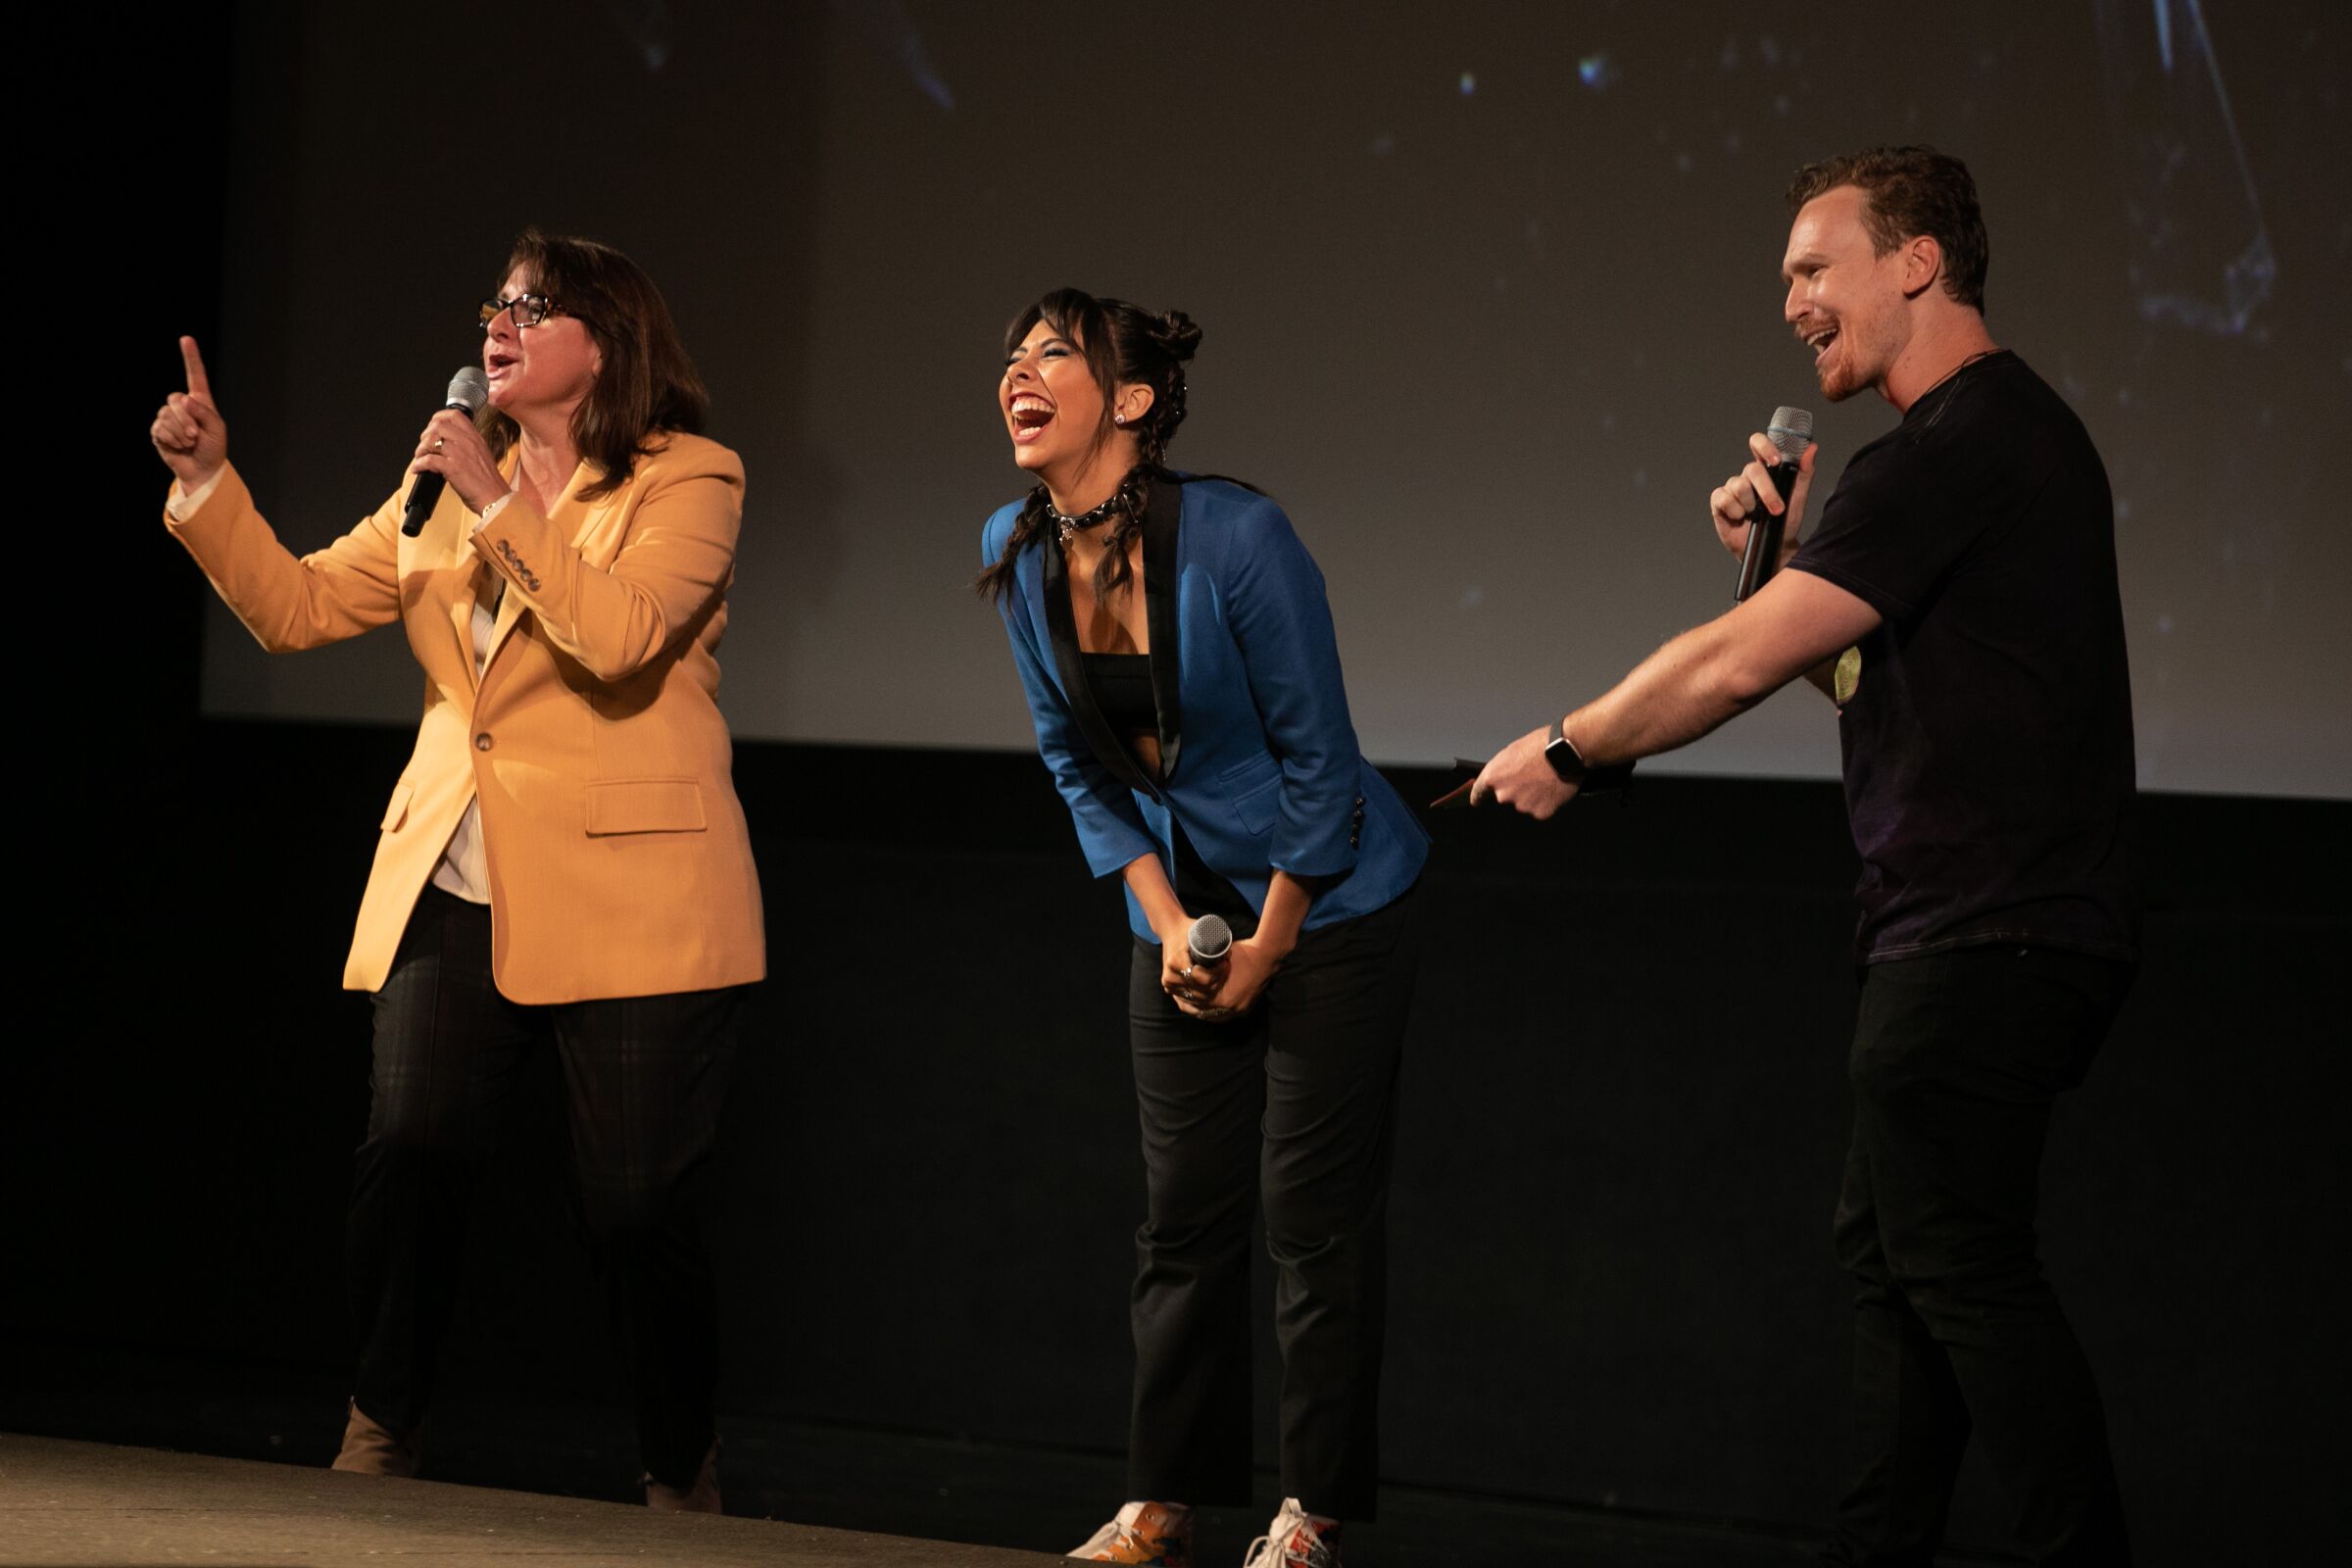 Three people speak from the El Capitan stage at the Hollywood premiere of "Doctor Strange in the Multiverse of Madness."